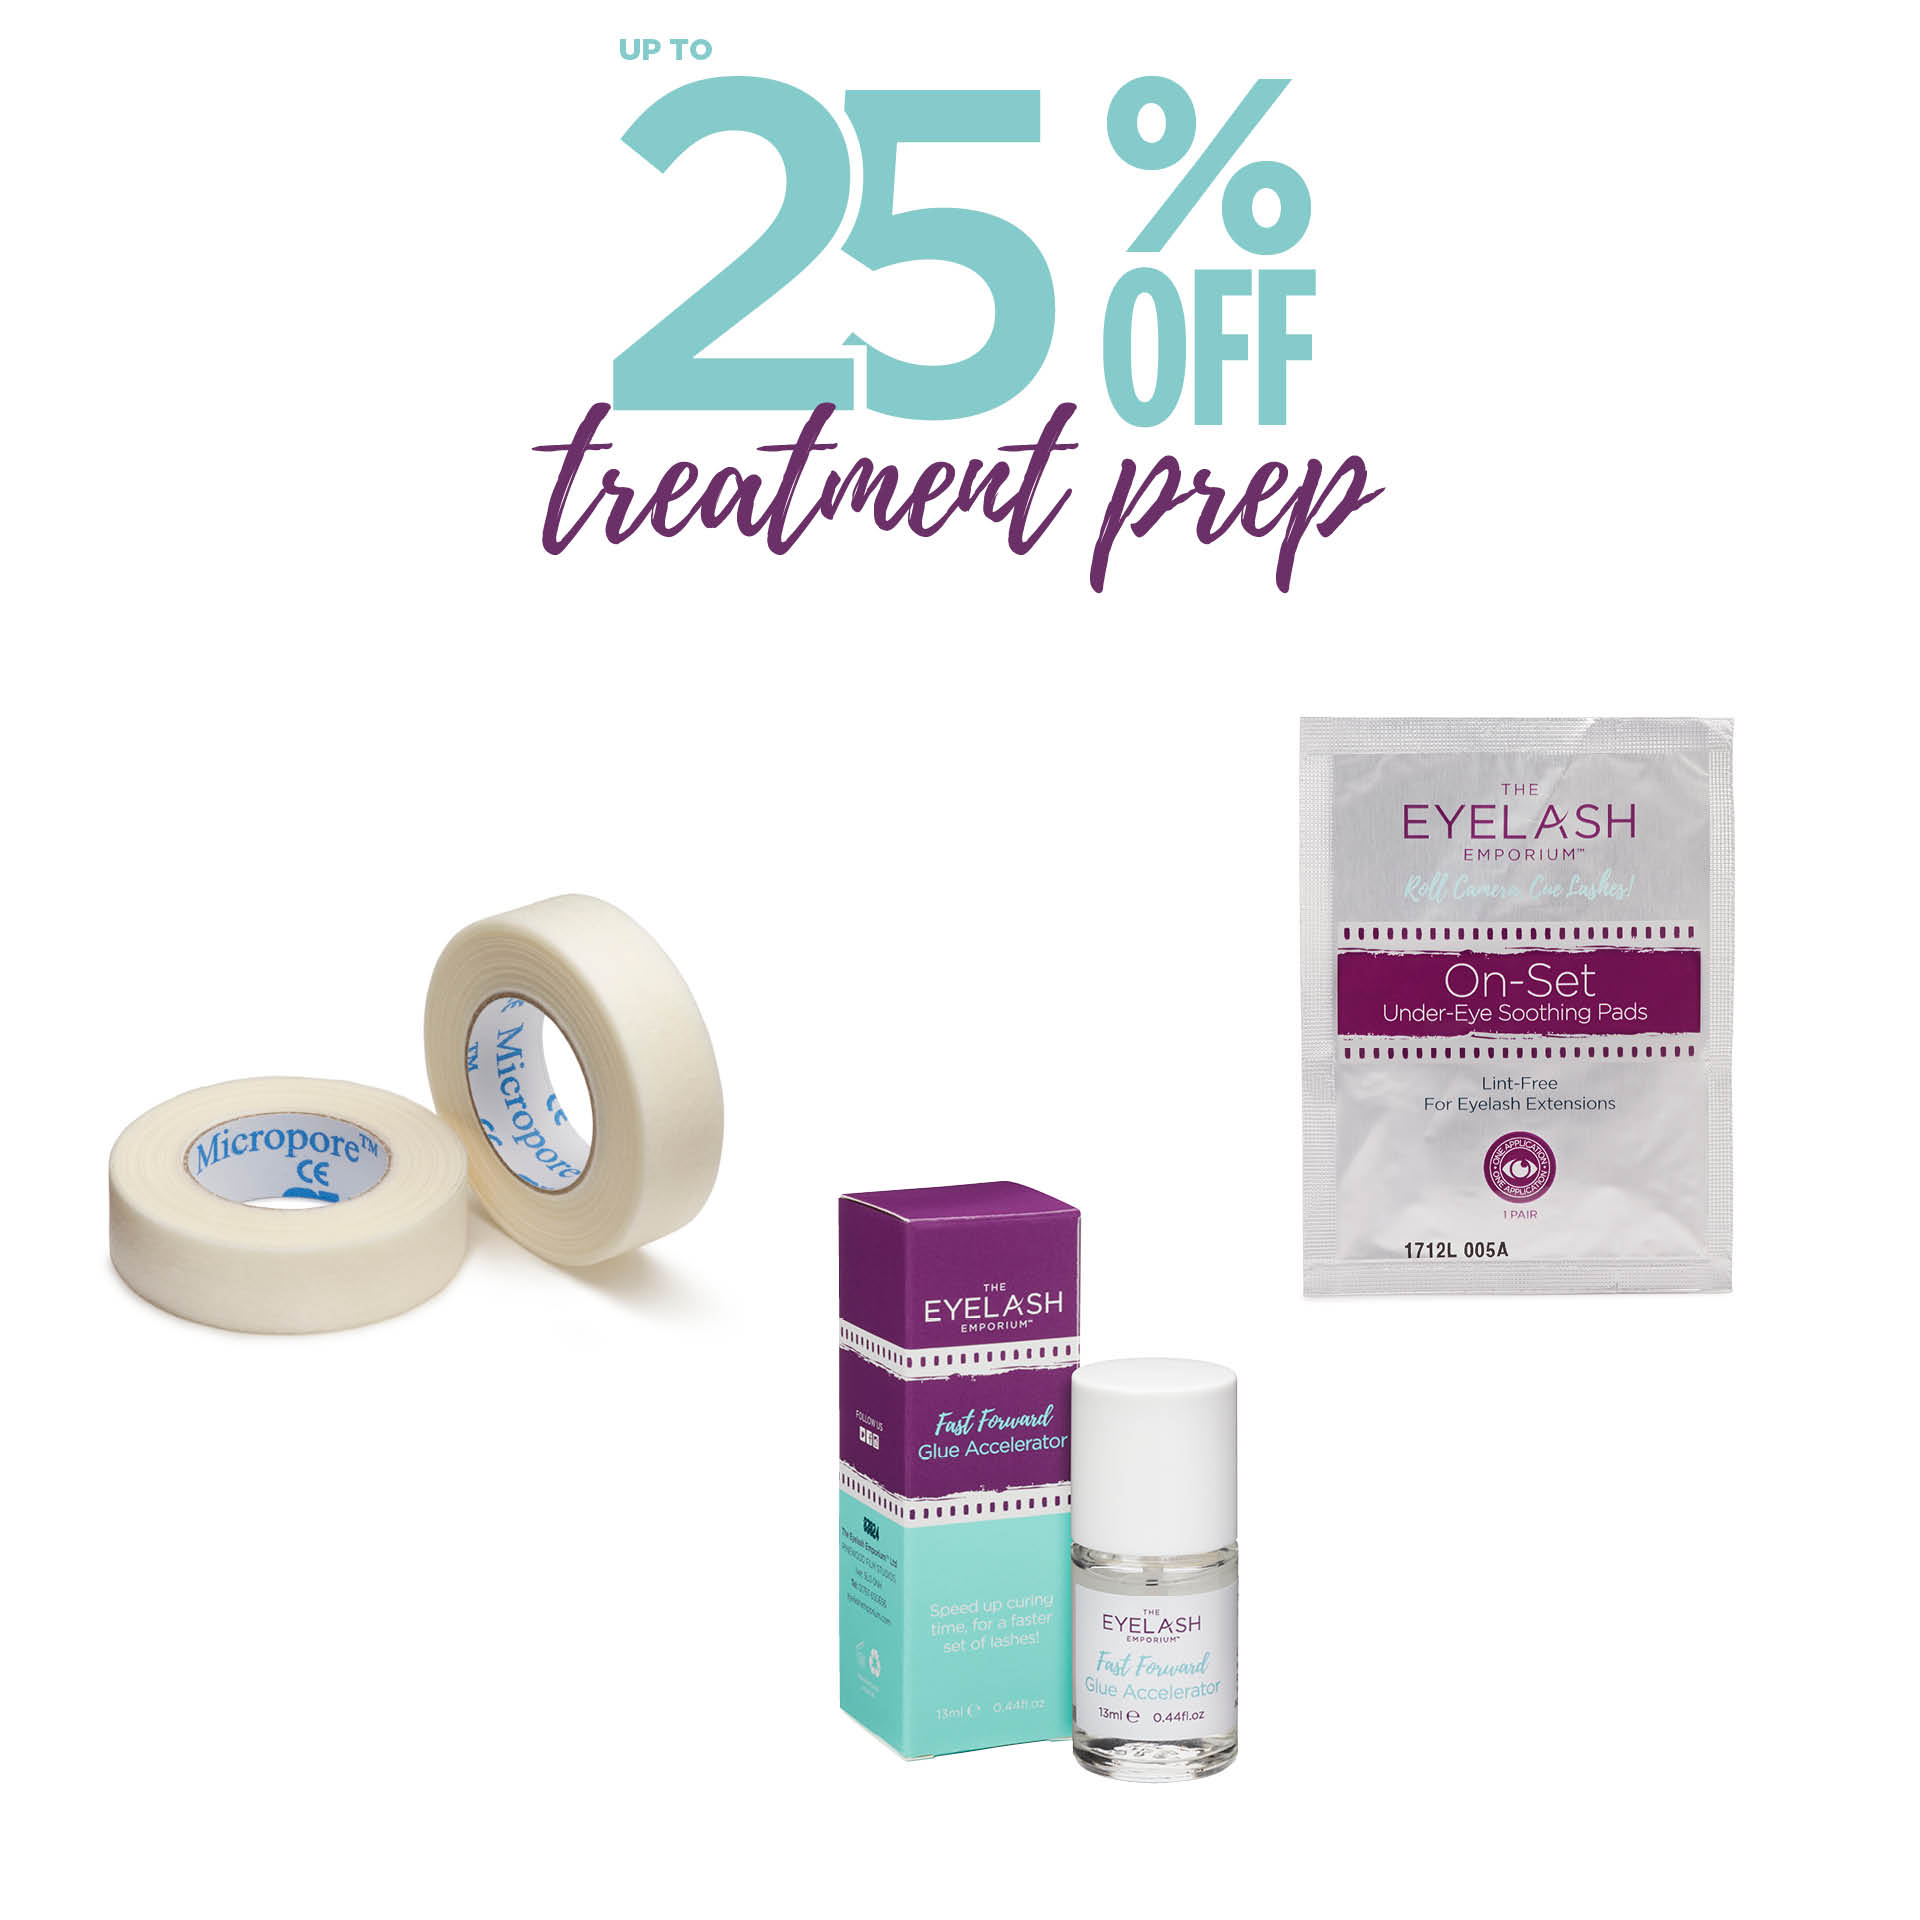 Up to 25% off treatment prep